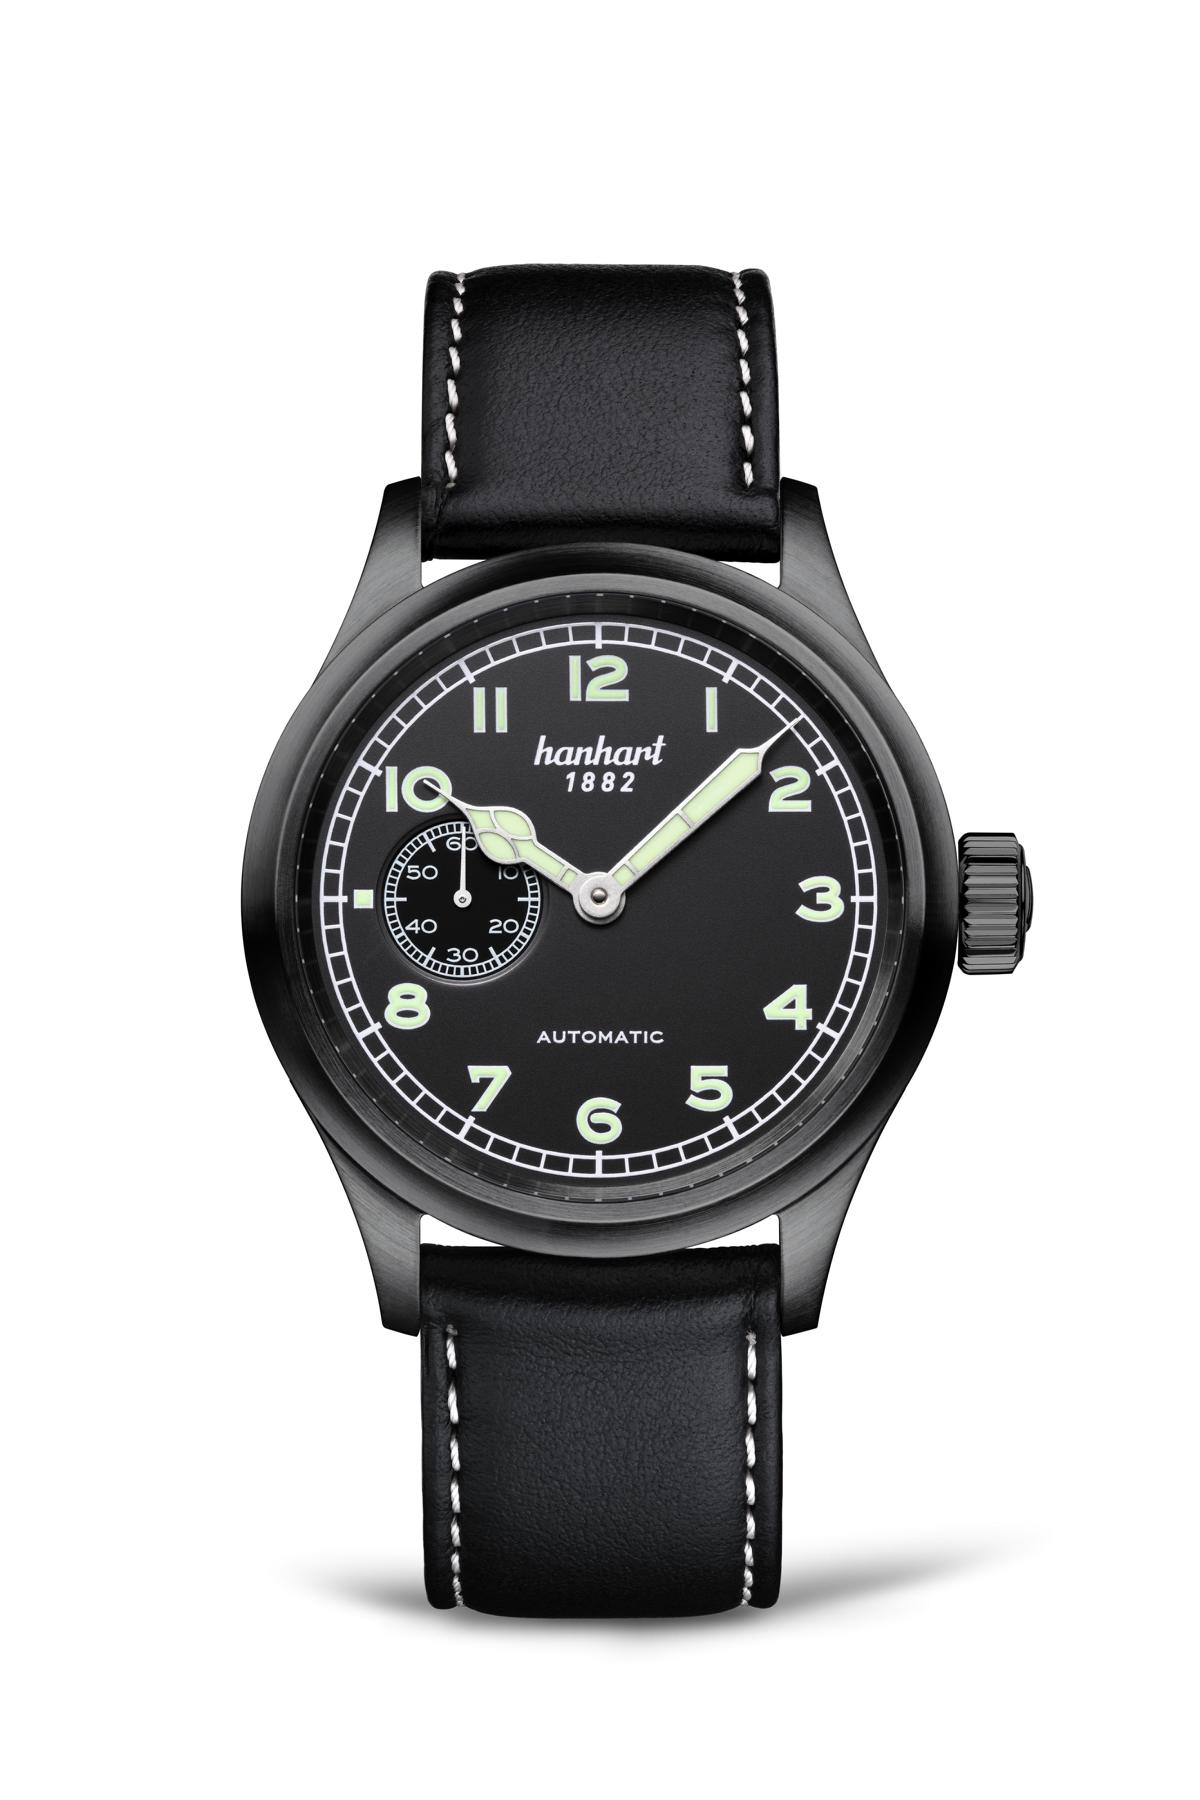 Hands-On With The New Olive-Green Rado Captain Cook High-Tech Ceramic Skeleton